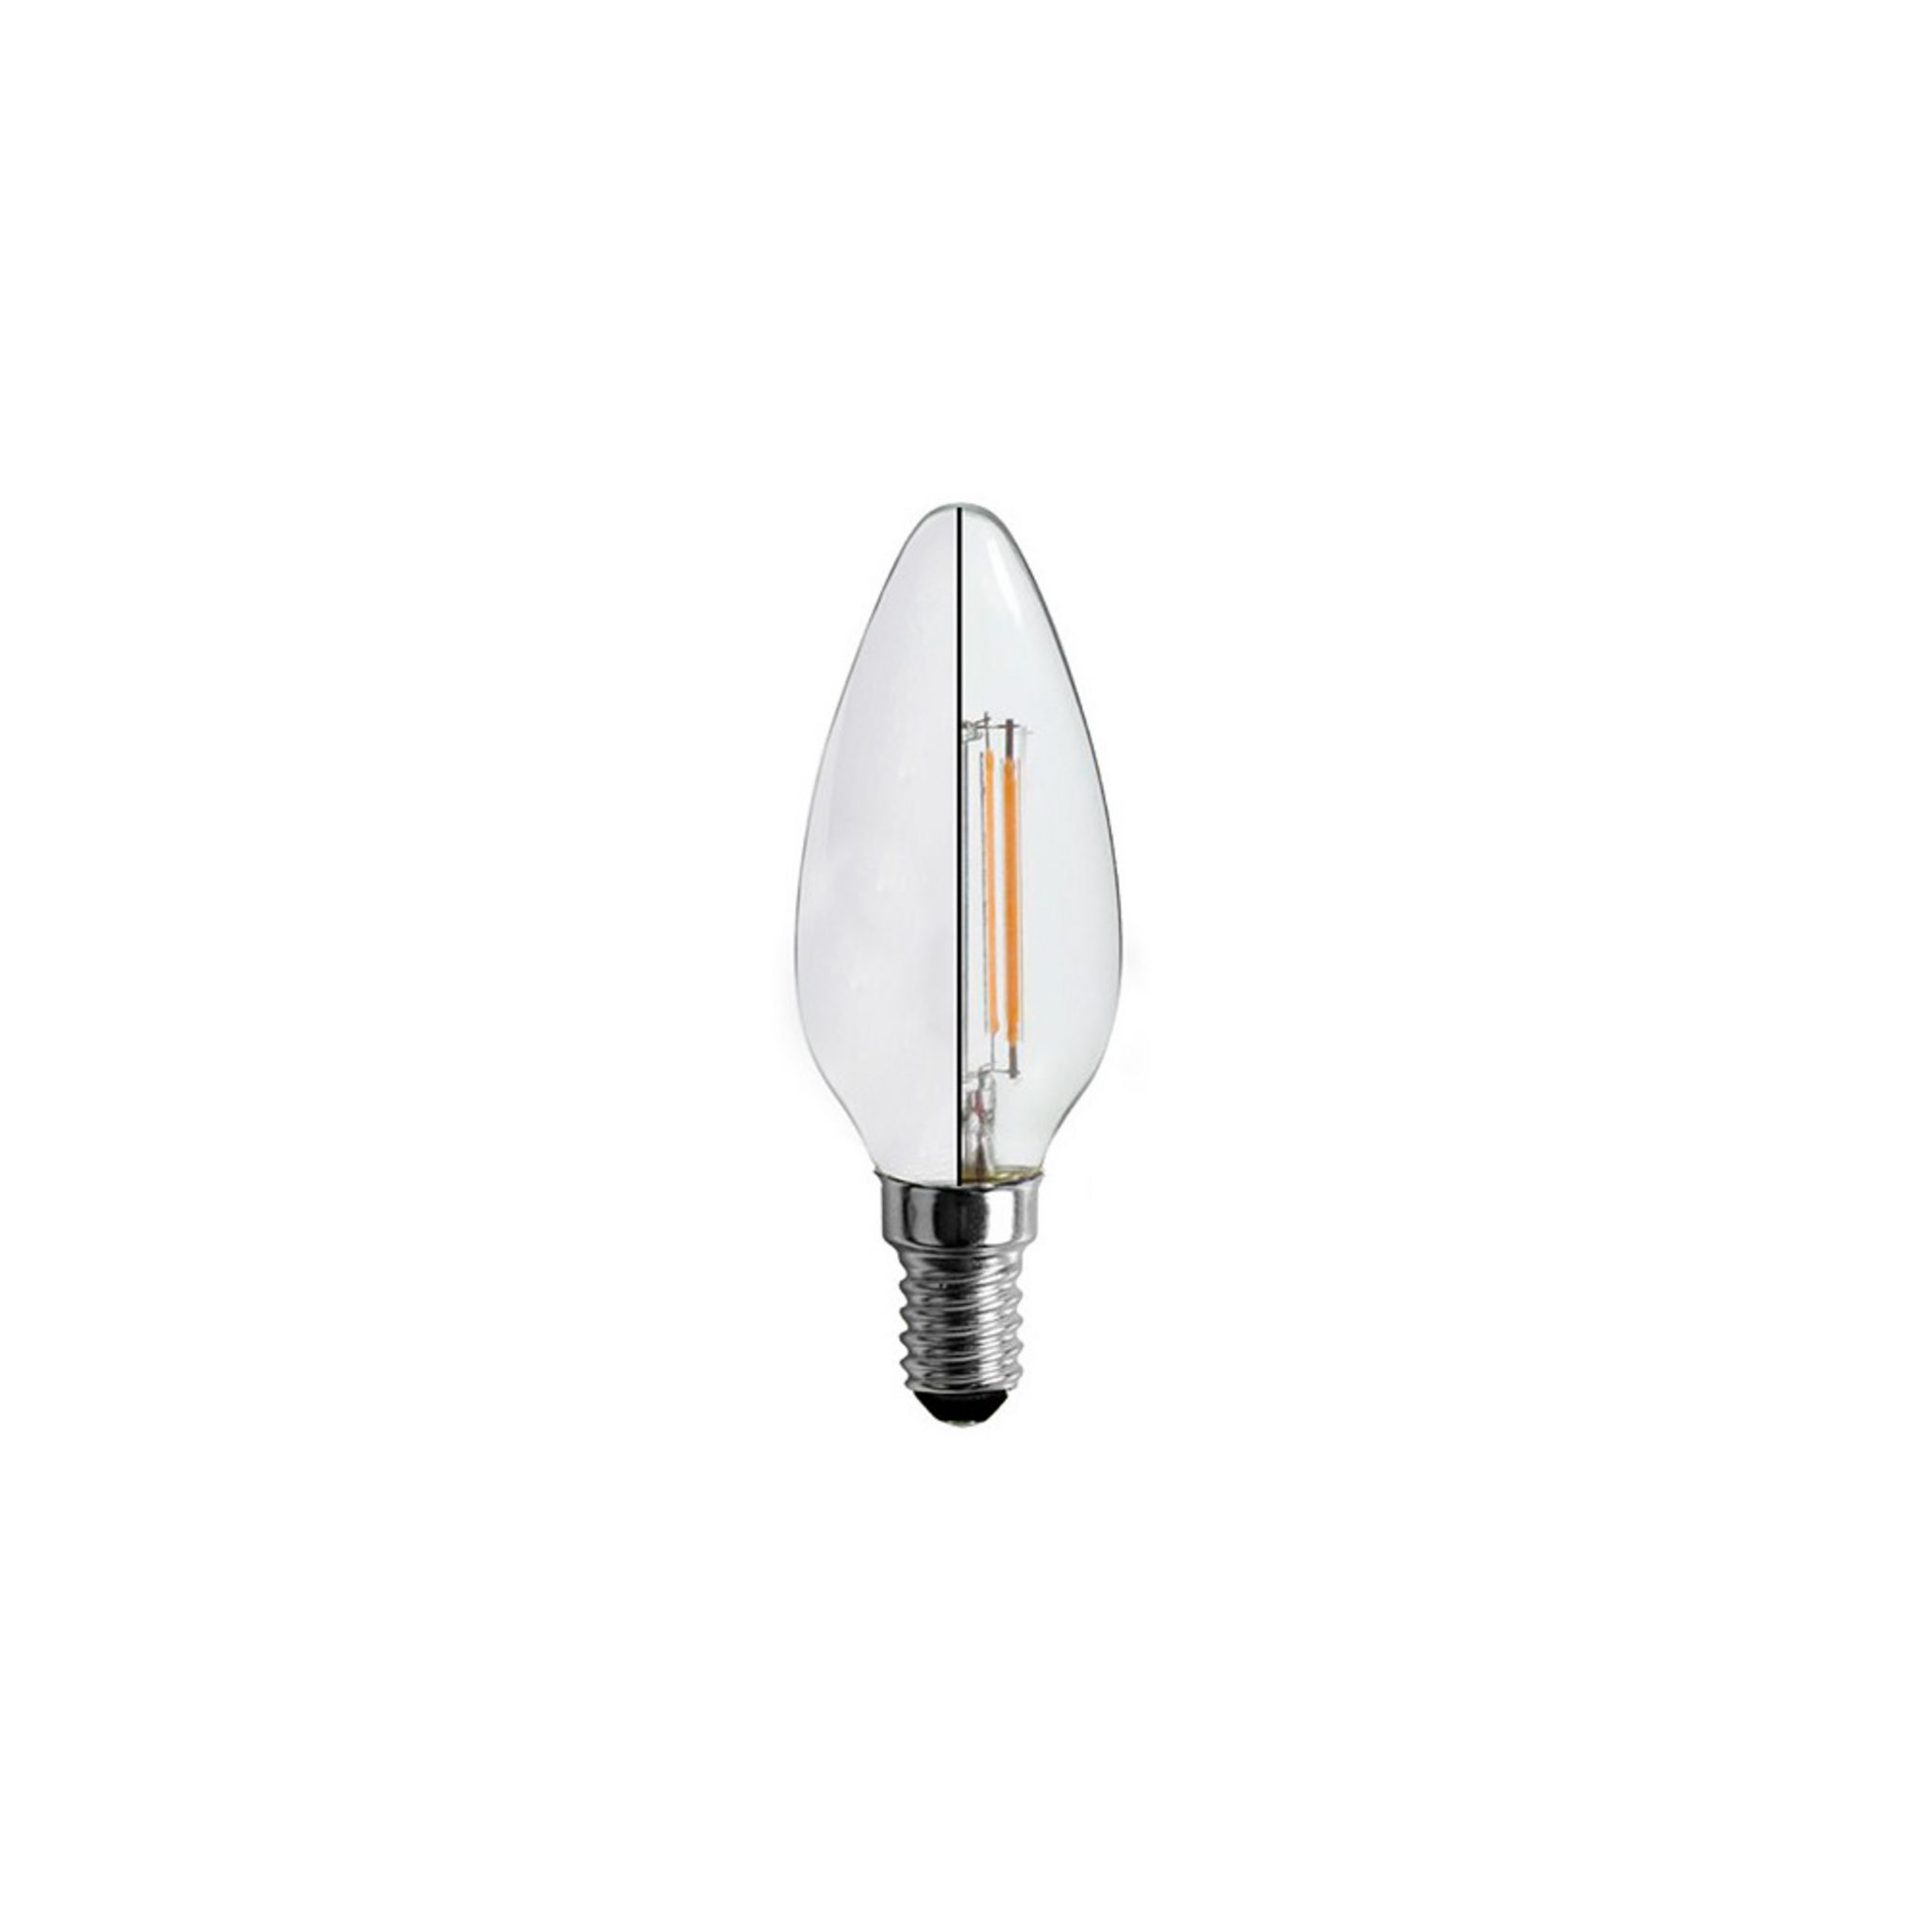 Ampoule led ronde E14 4w blanc/froid - Provence Outillage